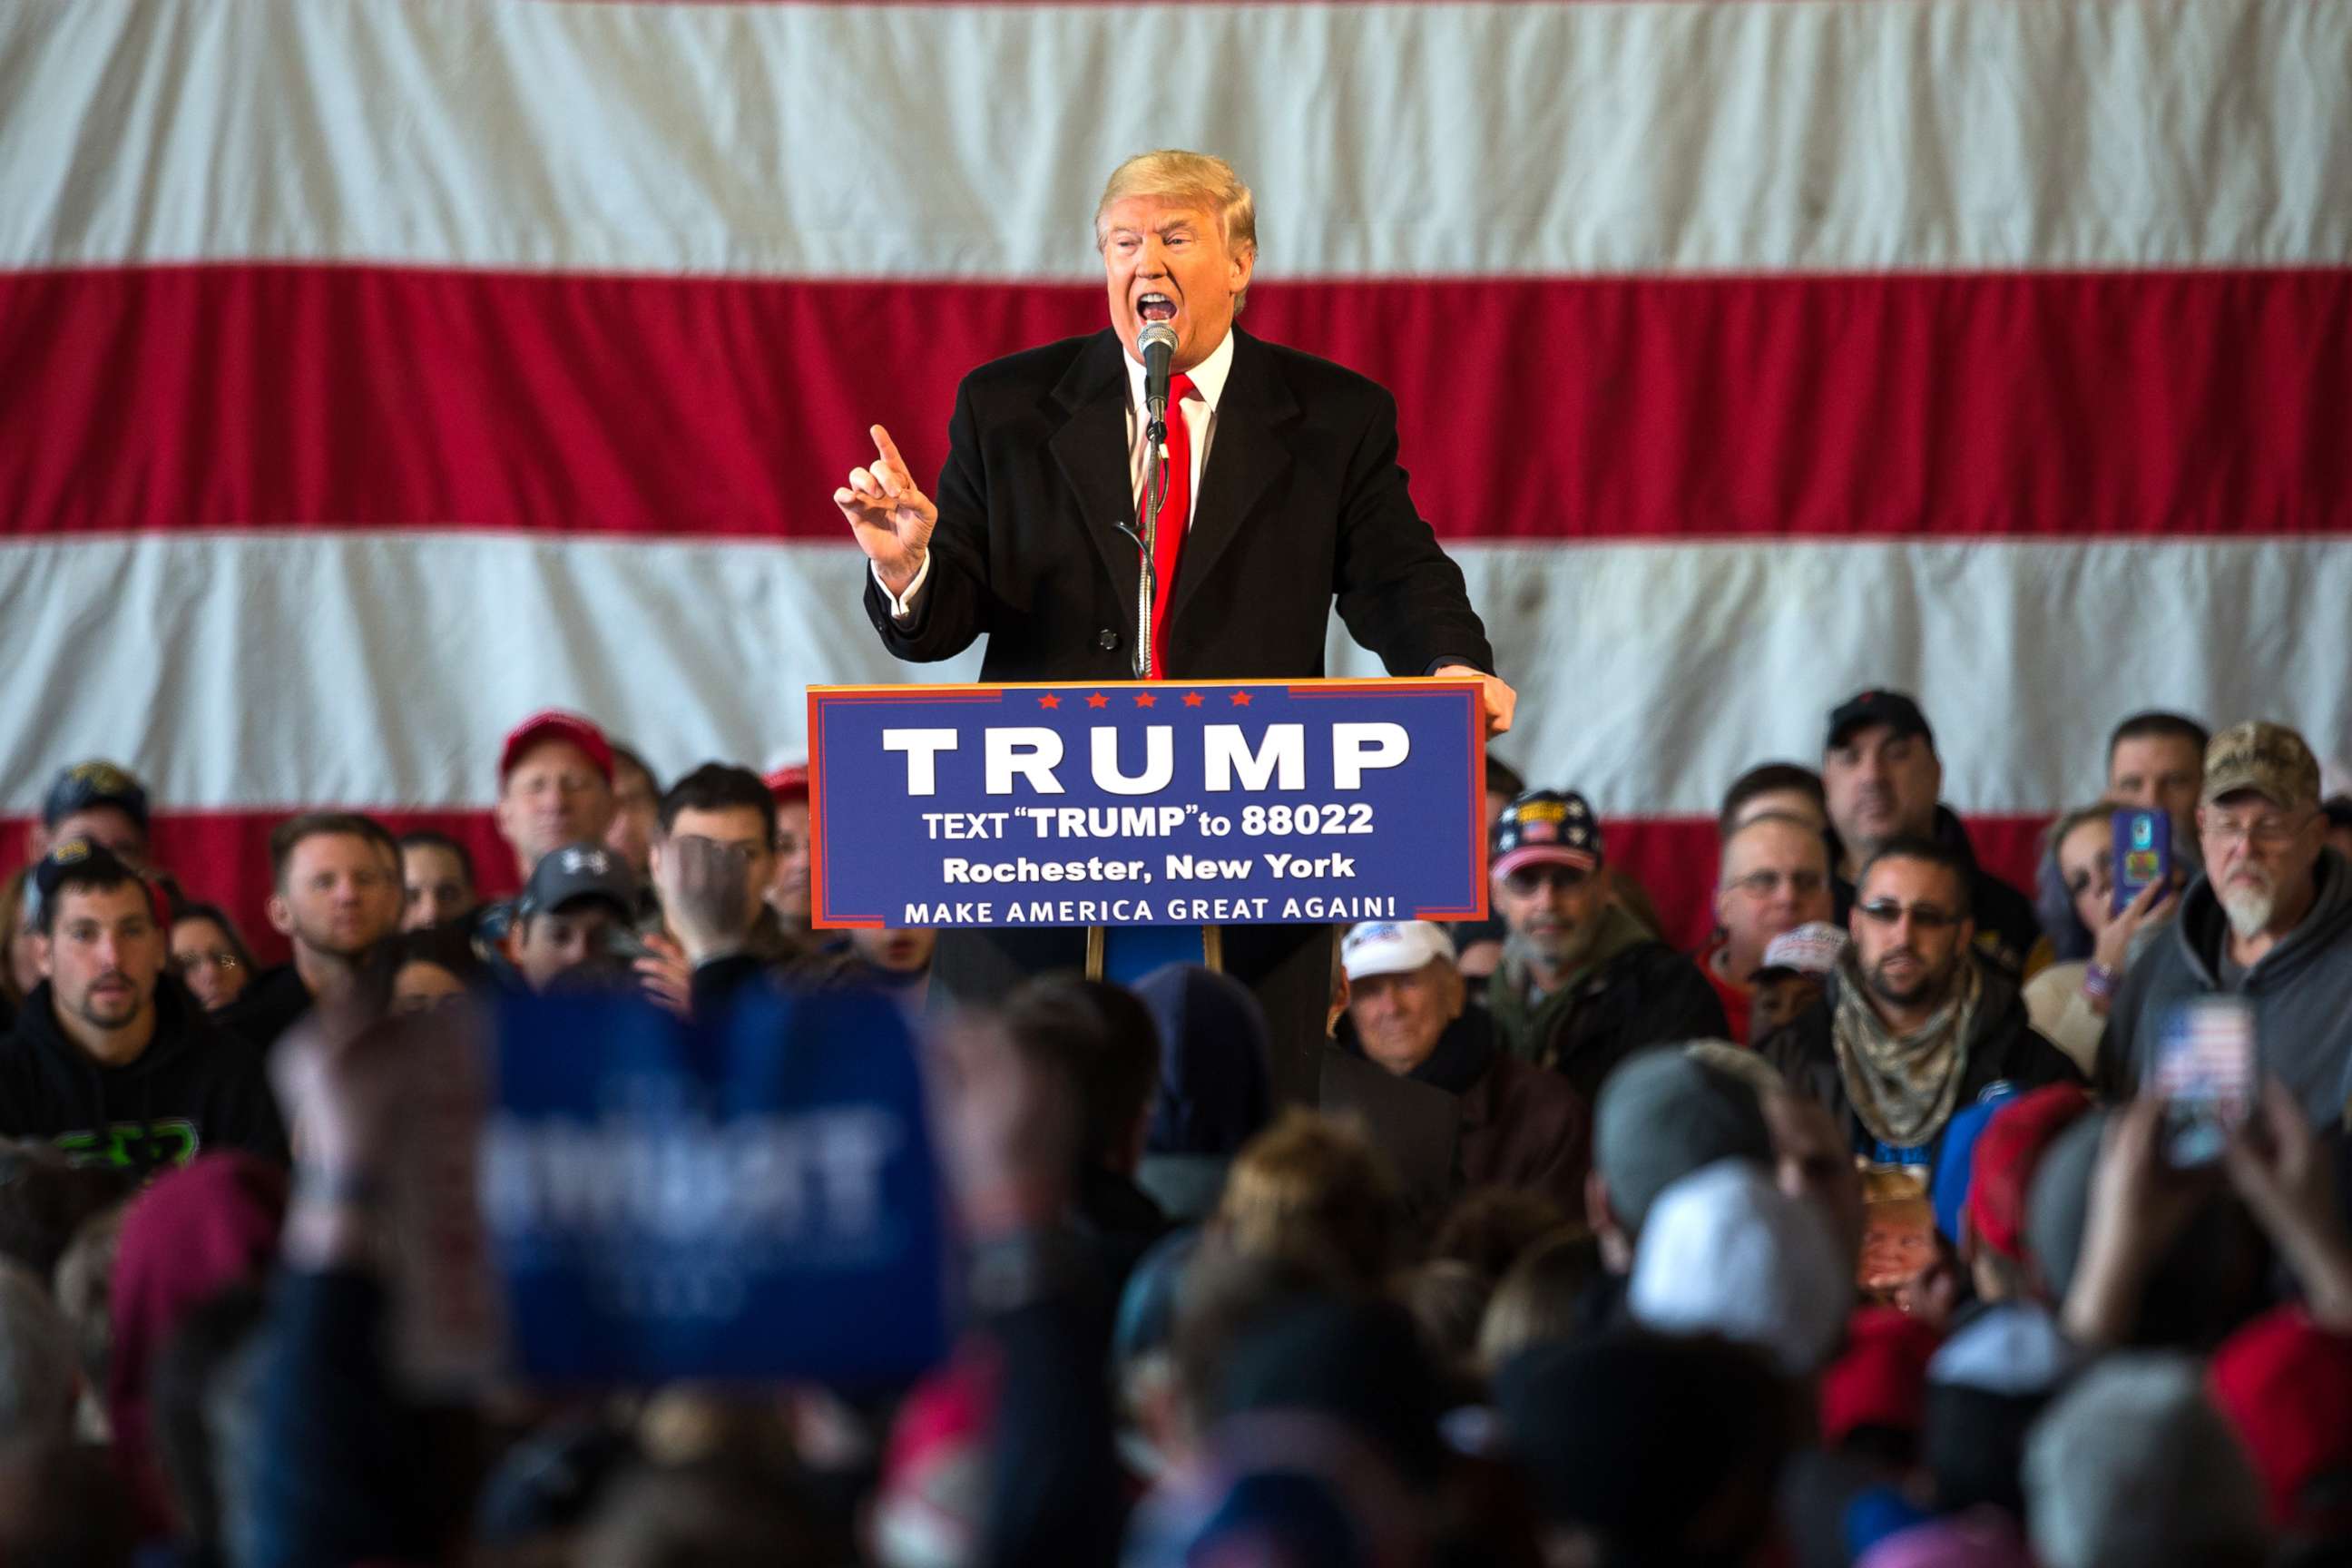 PHOTO: In this April 10, 2016, file photo, Presidential candidate Donald Trump speaks before a capacity crowd at a rally for his campaign, in Rochester, N.Y.